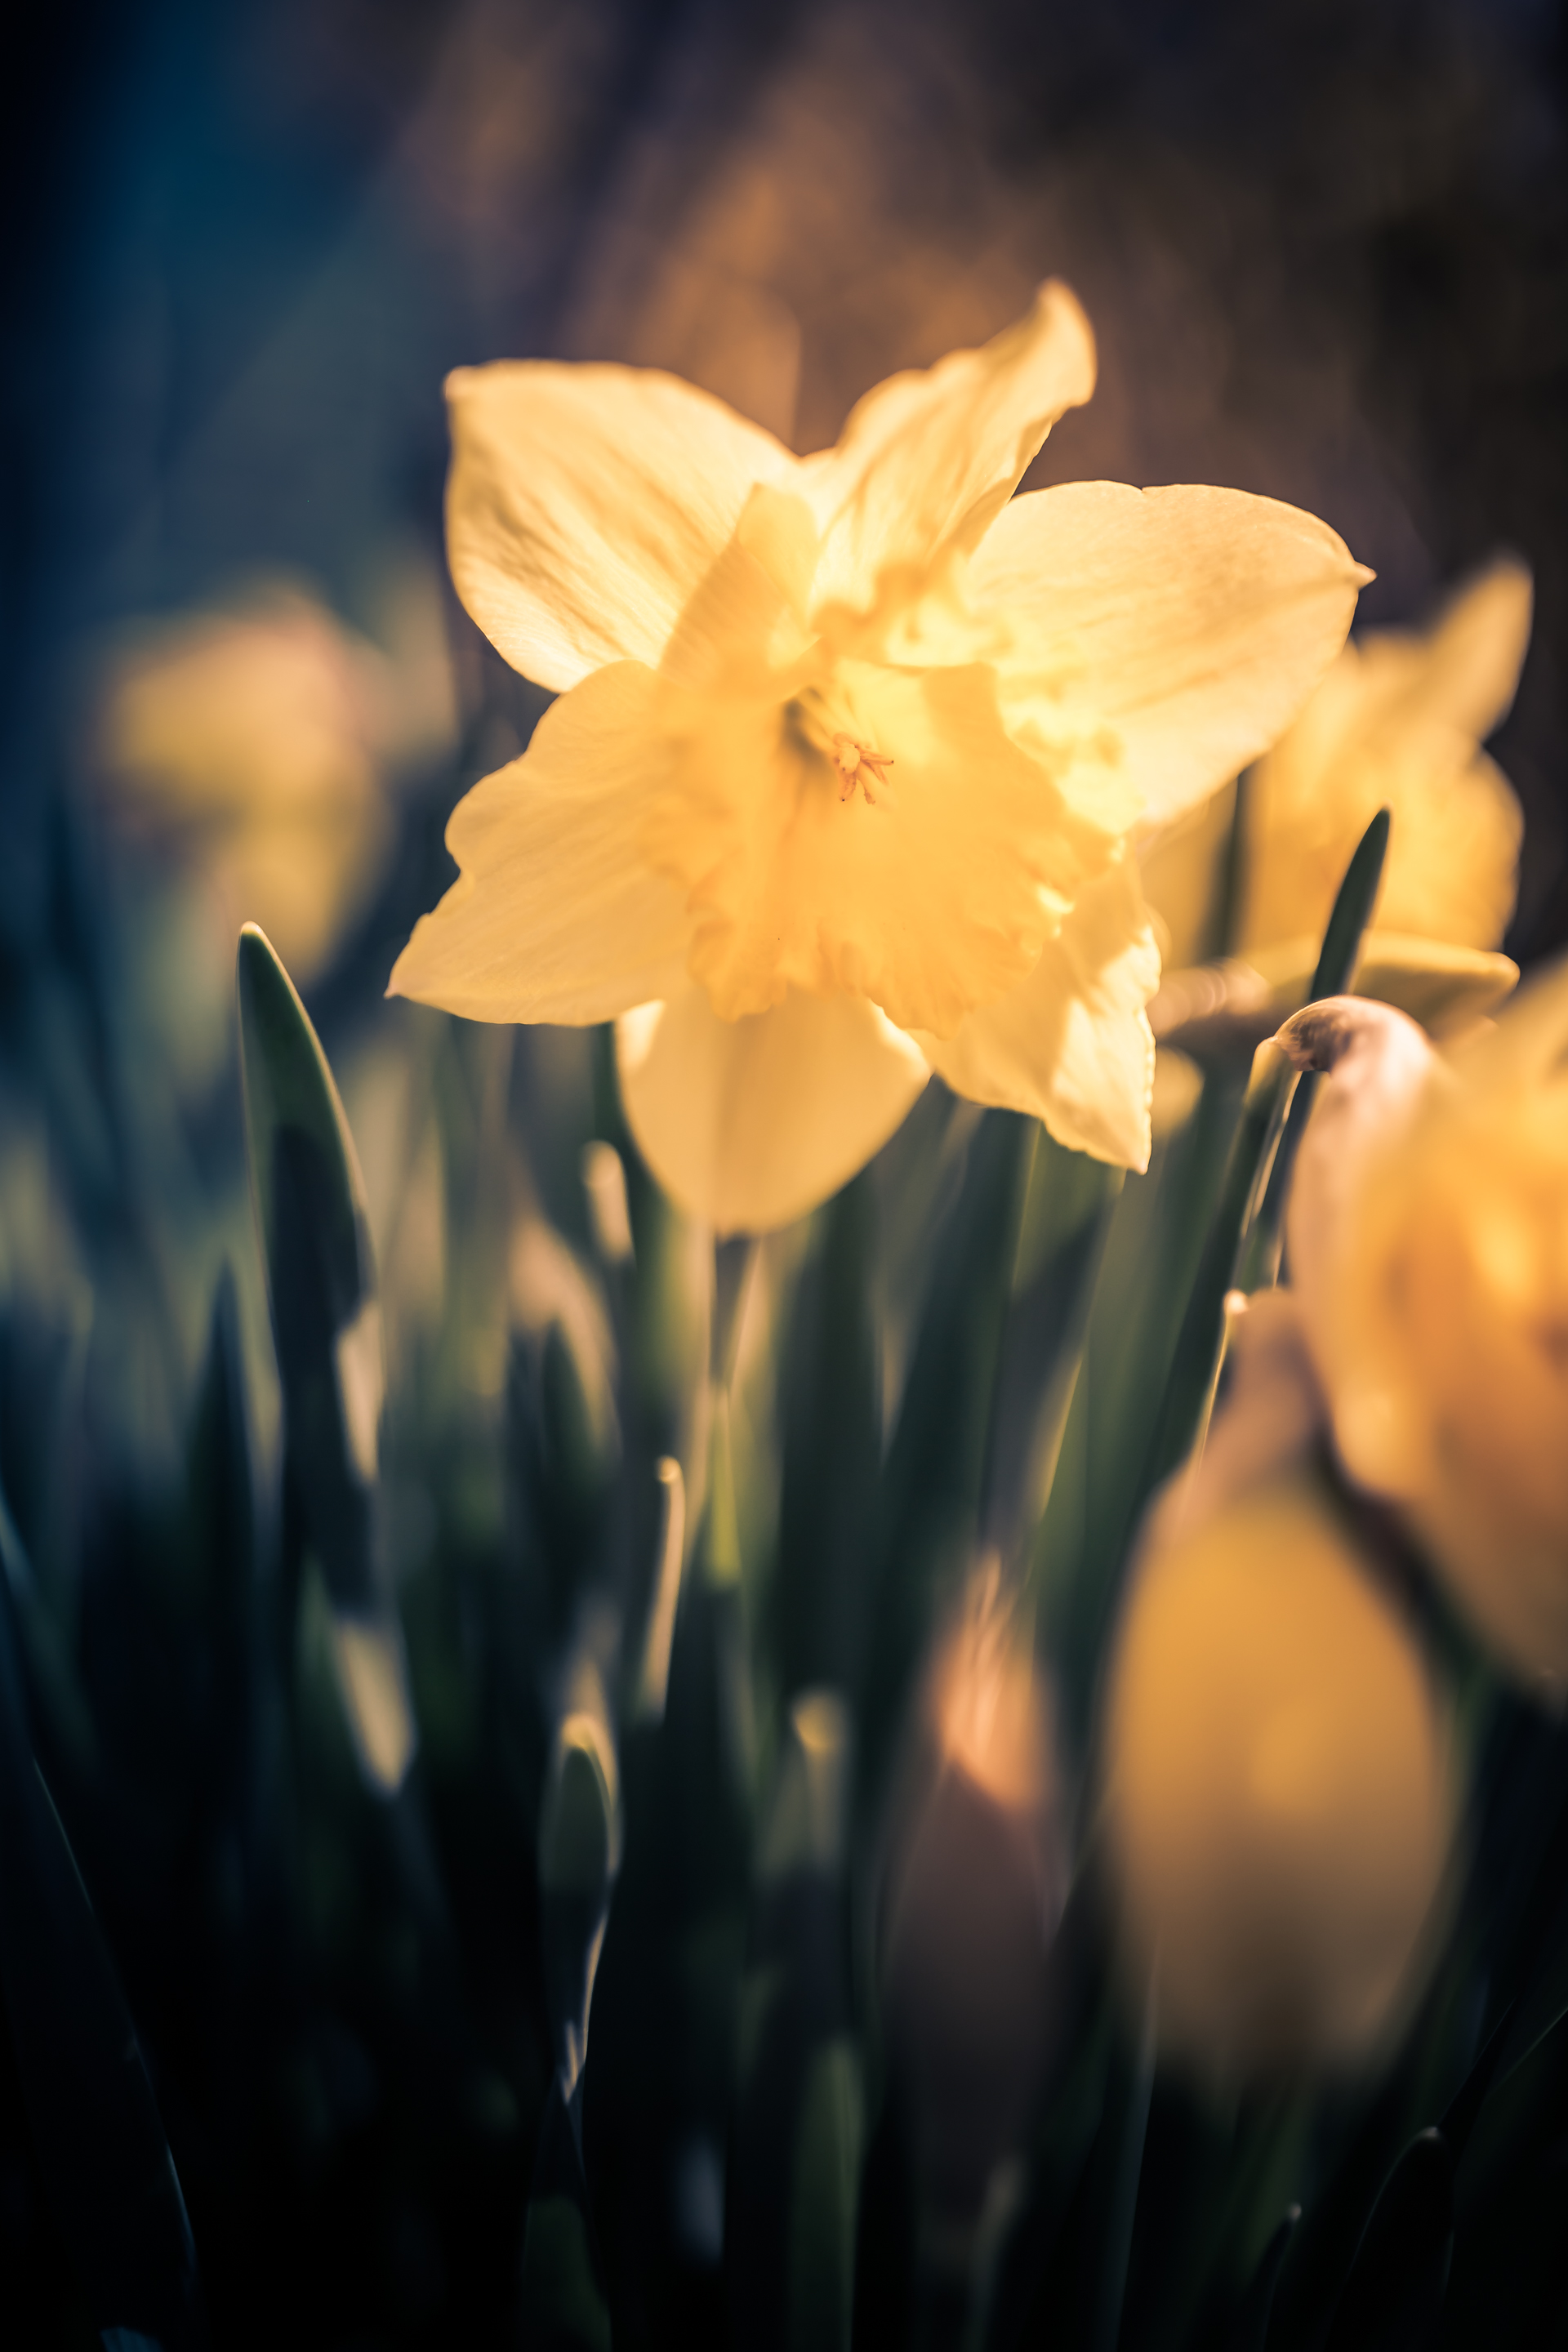 Daffodil photos with smooth bokeh and shallow depth of field.